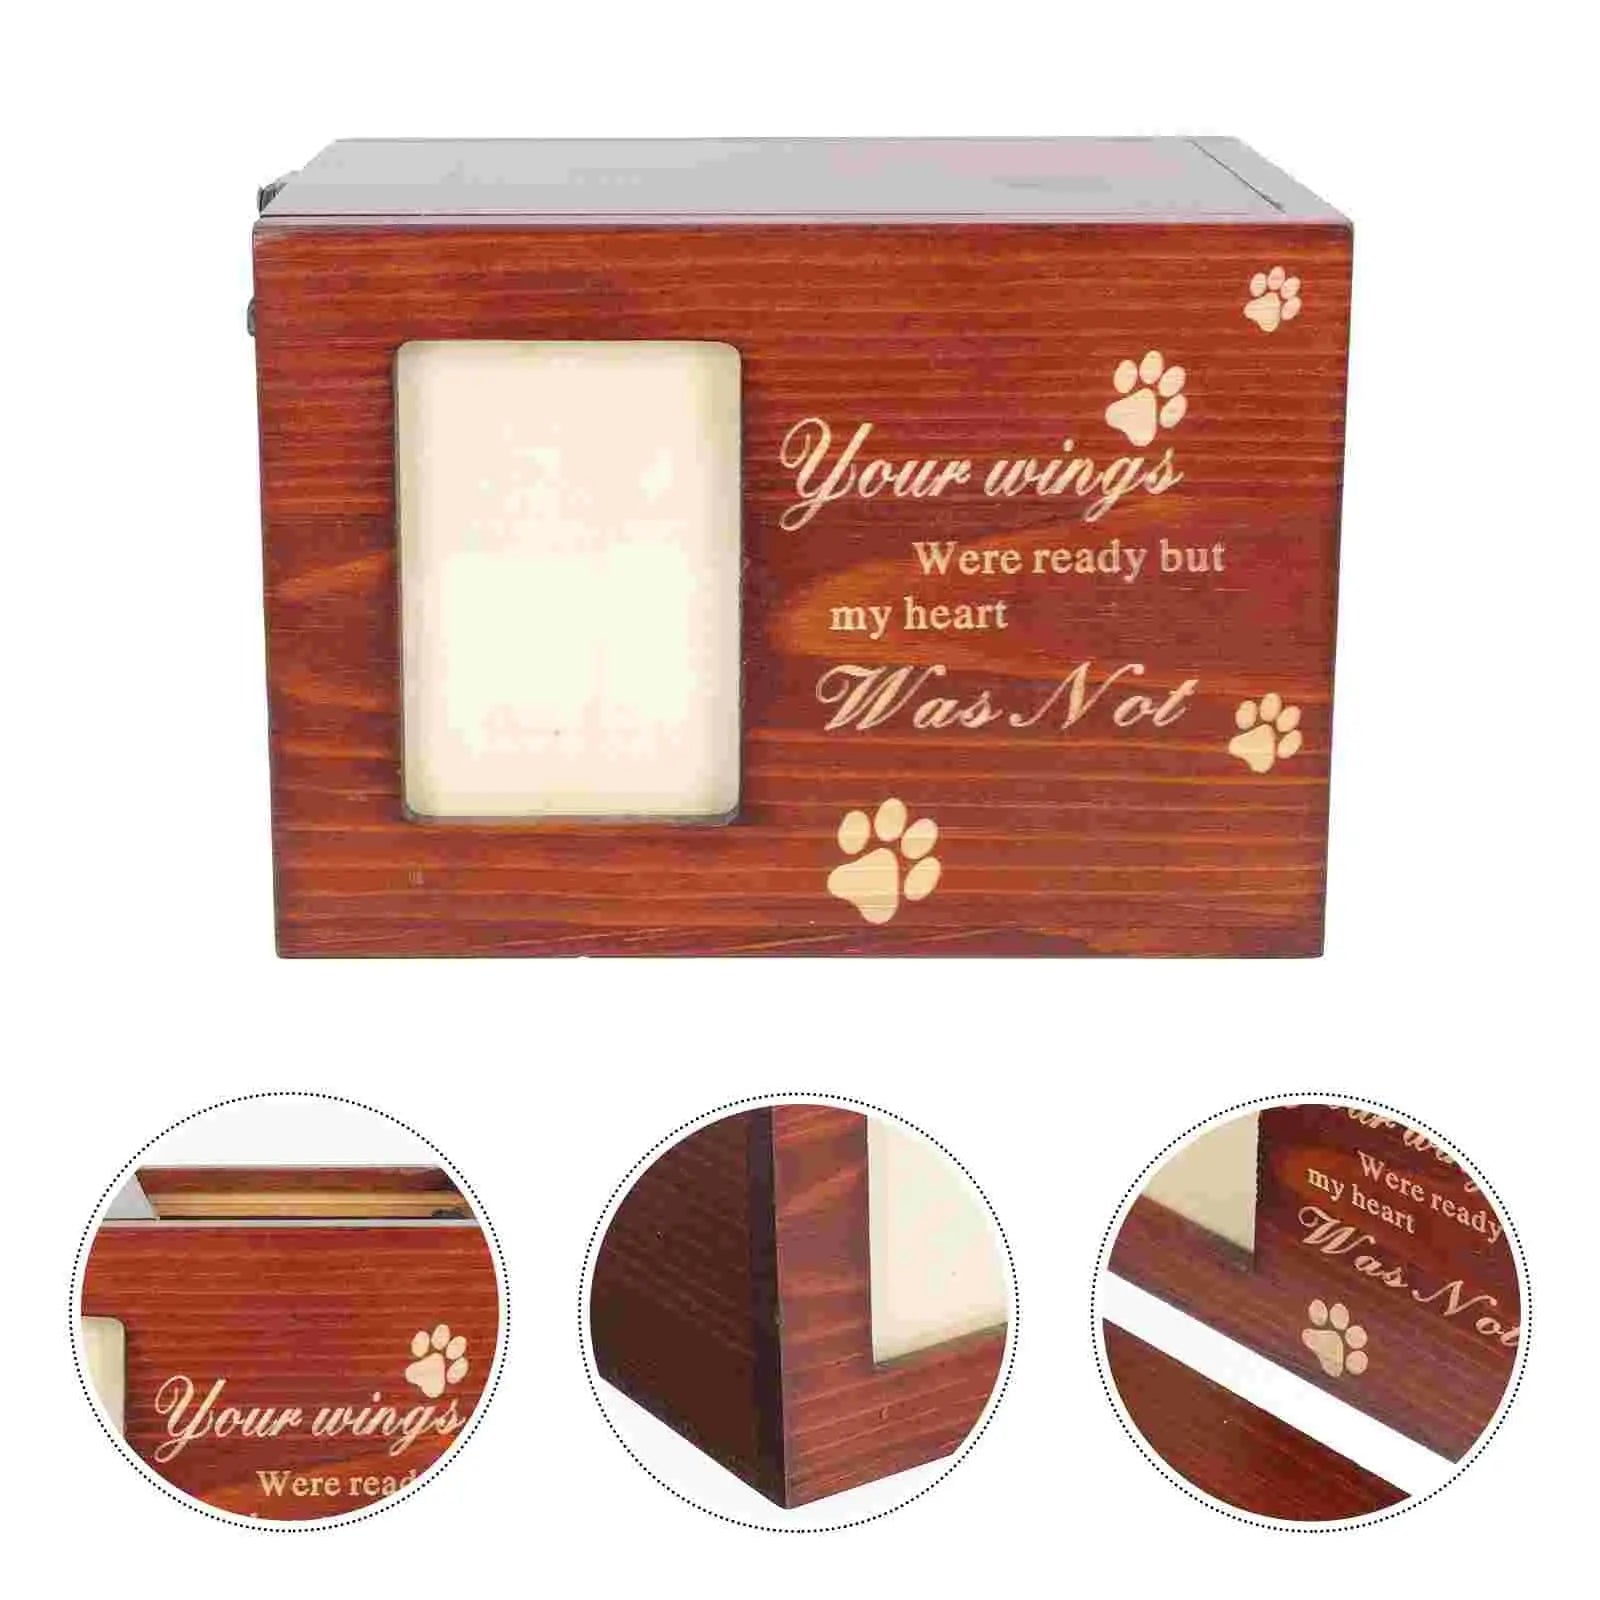 Favori Pet Ashes Urn-Pet Urn for Ashes-Cremation Urns- The cremation urns for ashes and keepsakes for ashes come in a variety of styles to suit most tastes, decor and different volumes of funeral ashes.